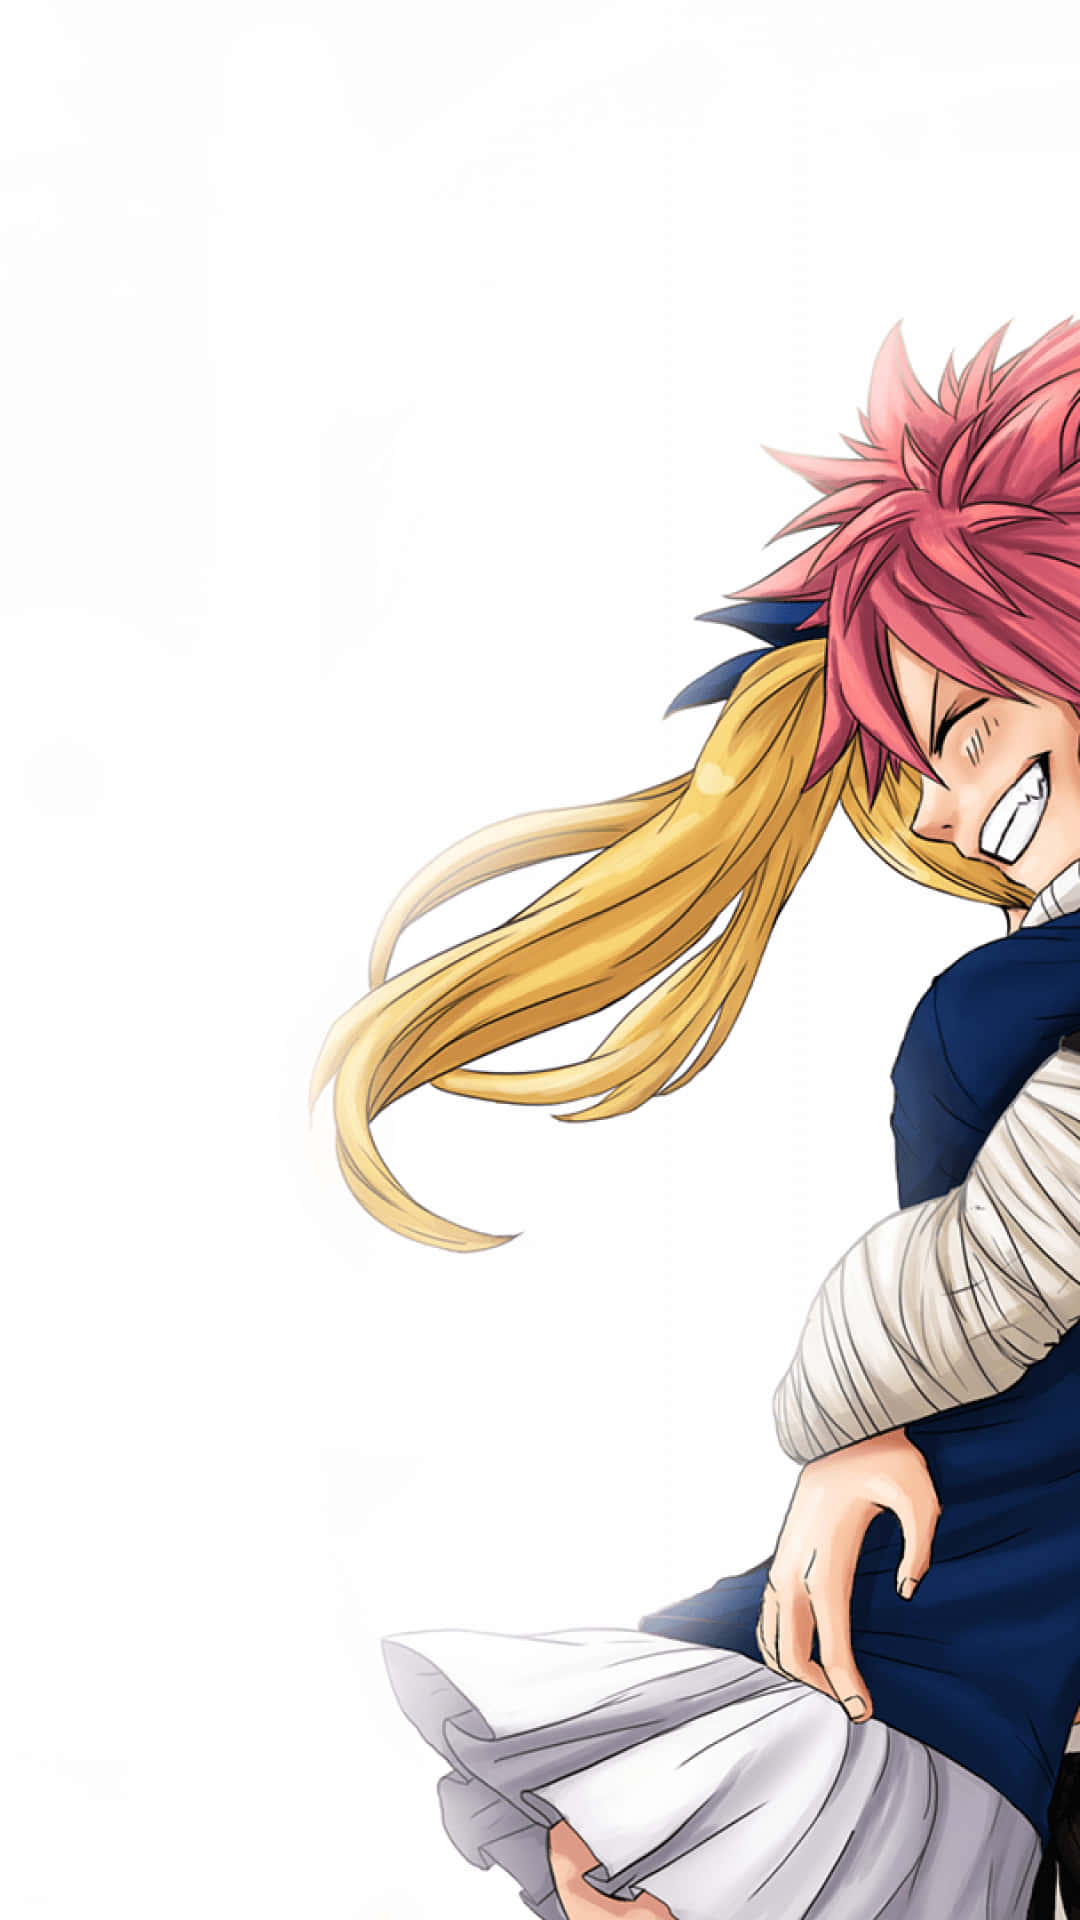 2000x1722  Natsu Dragneel Fairy Tail wallpaper  Coolwallpapersme